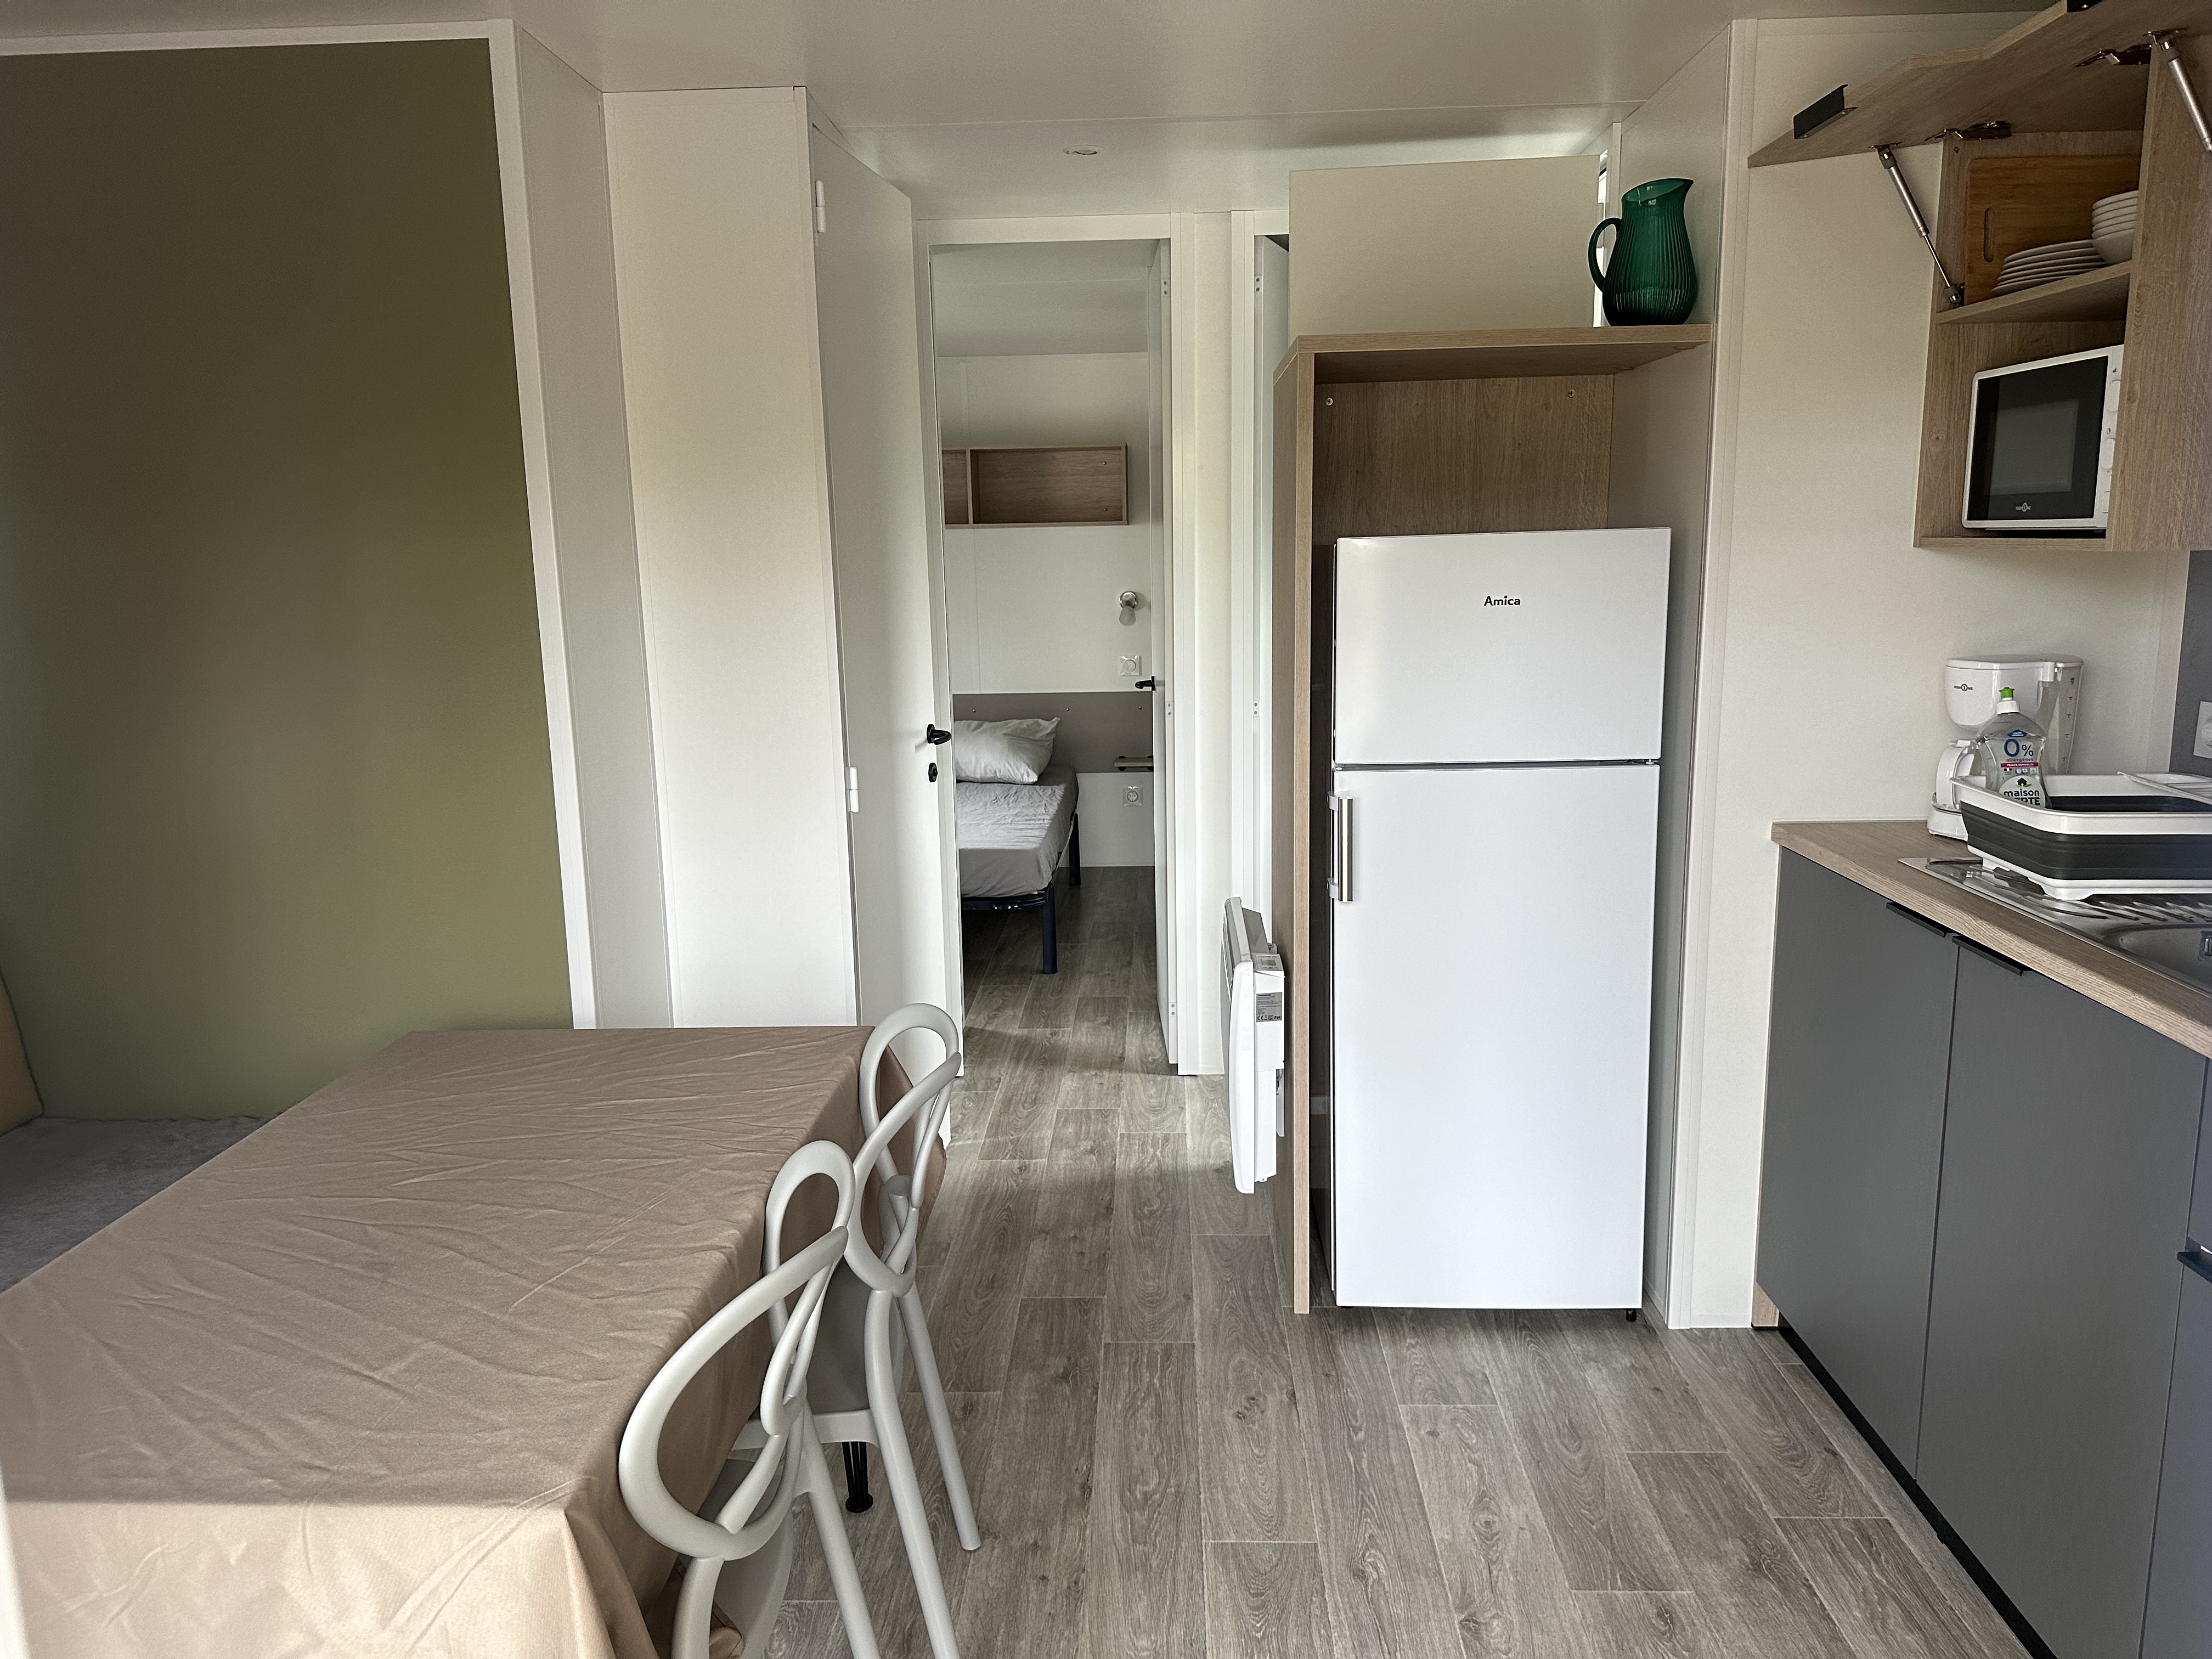 Location - Mobil Home 2 Chambres Bis Animaux Interdits - Le Cattiaux Camping